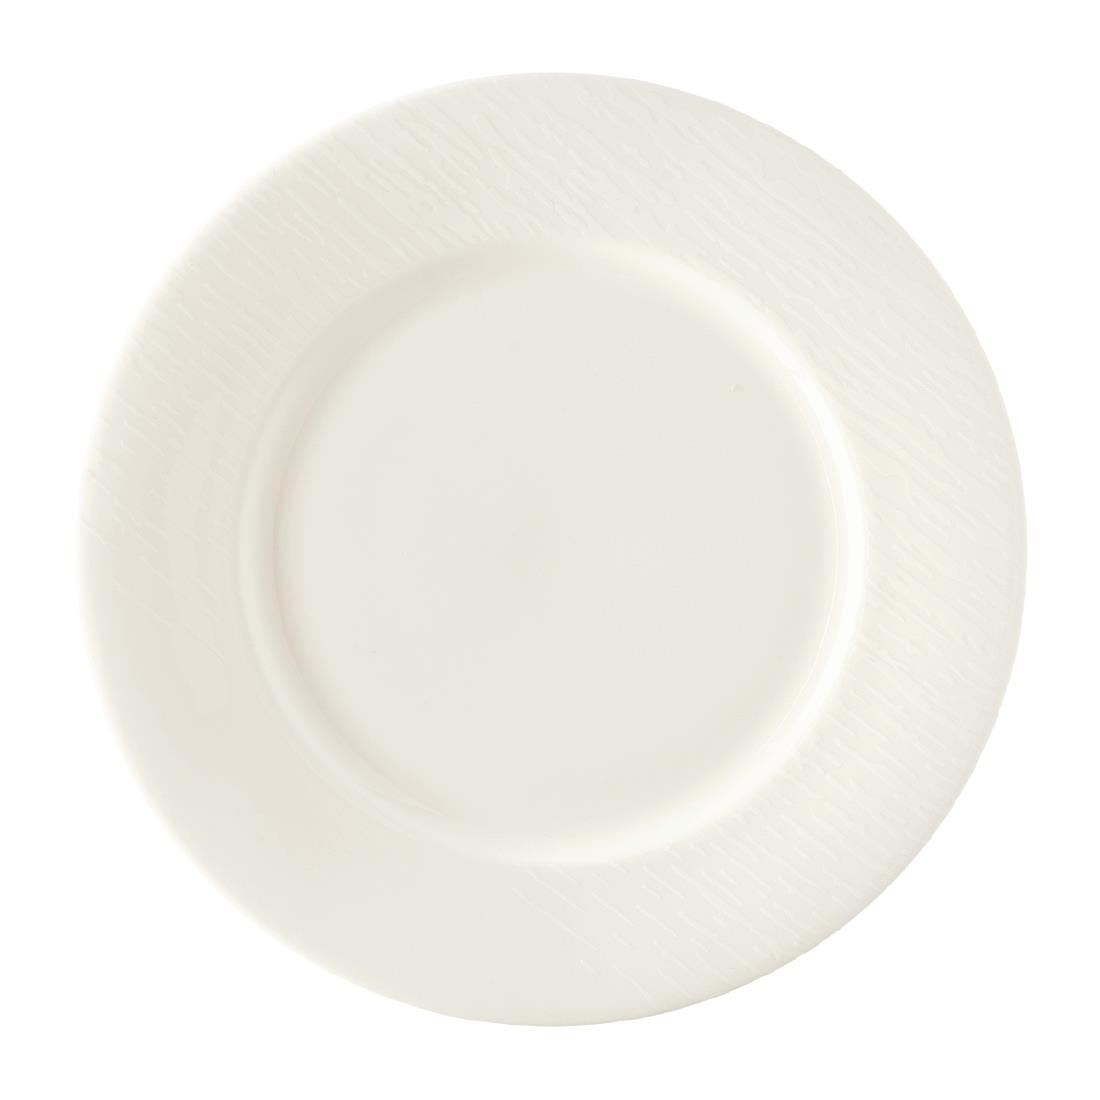 Royal Crown Derby Bark White Flat Rim Plate 215mm (Pack of 6)